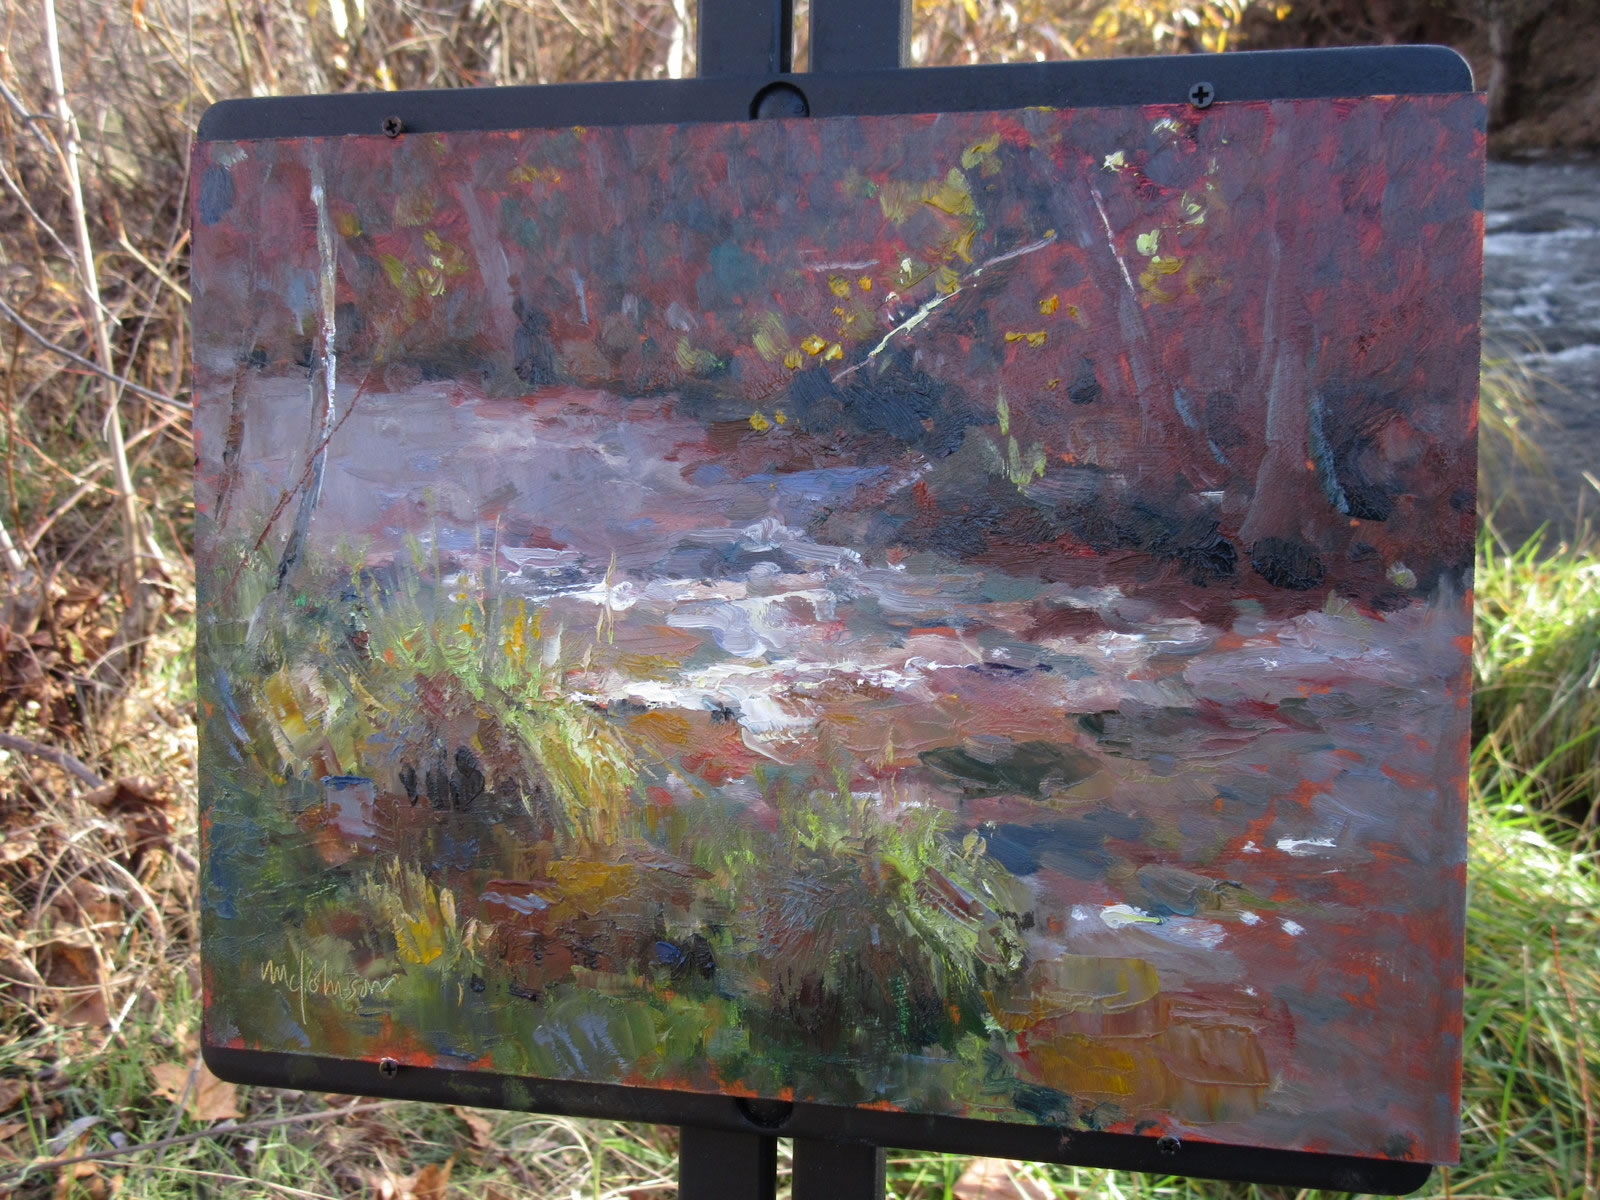 DAYTRIPPER PLEIN AIR EASEL by Prolific Painter – Inspired to Paint